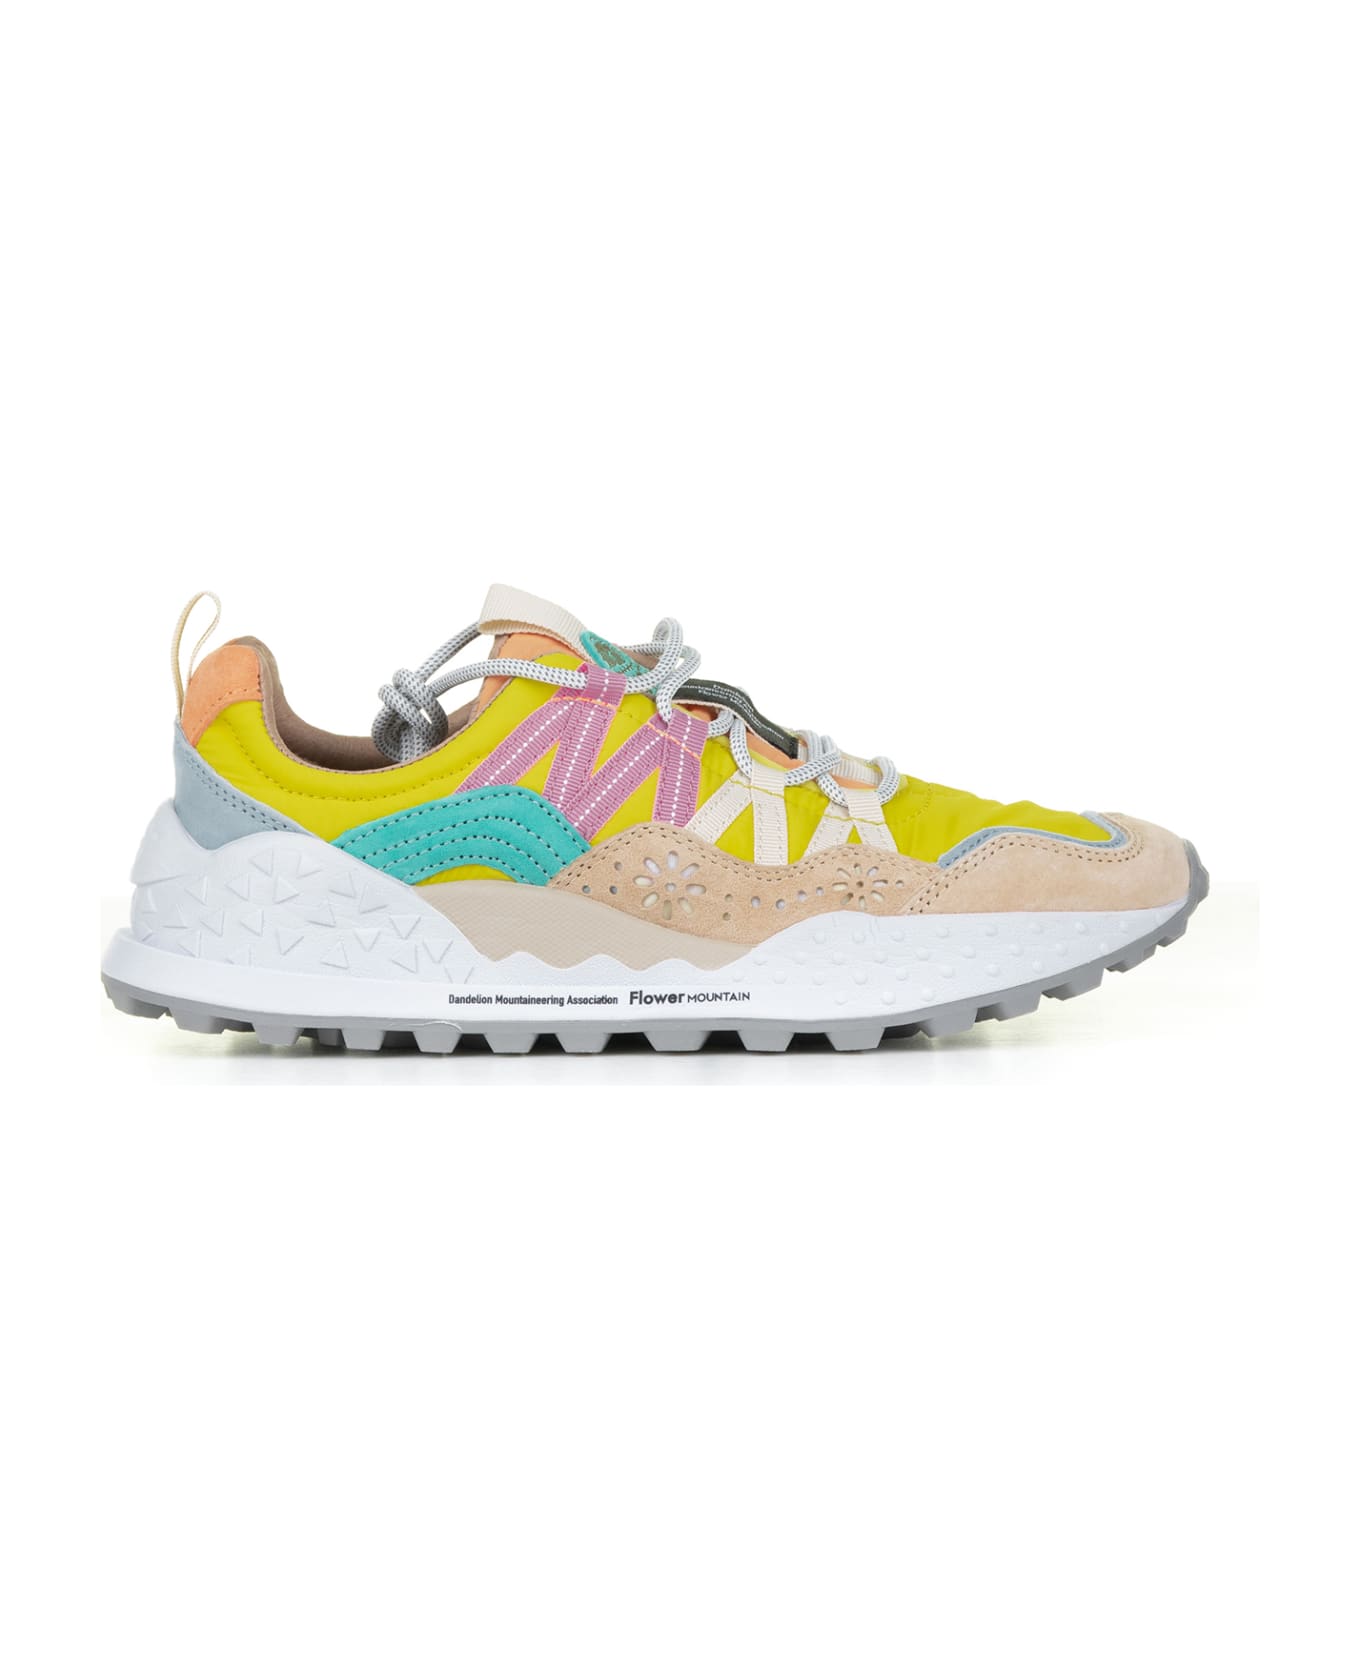 Flower Mountain Multicolored Washi Sneakers In Suede And Nylon - BEIGE YELLOW